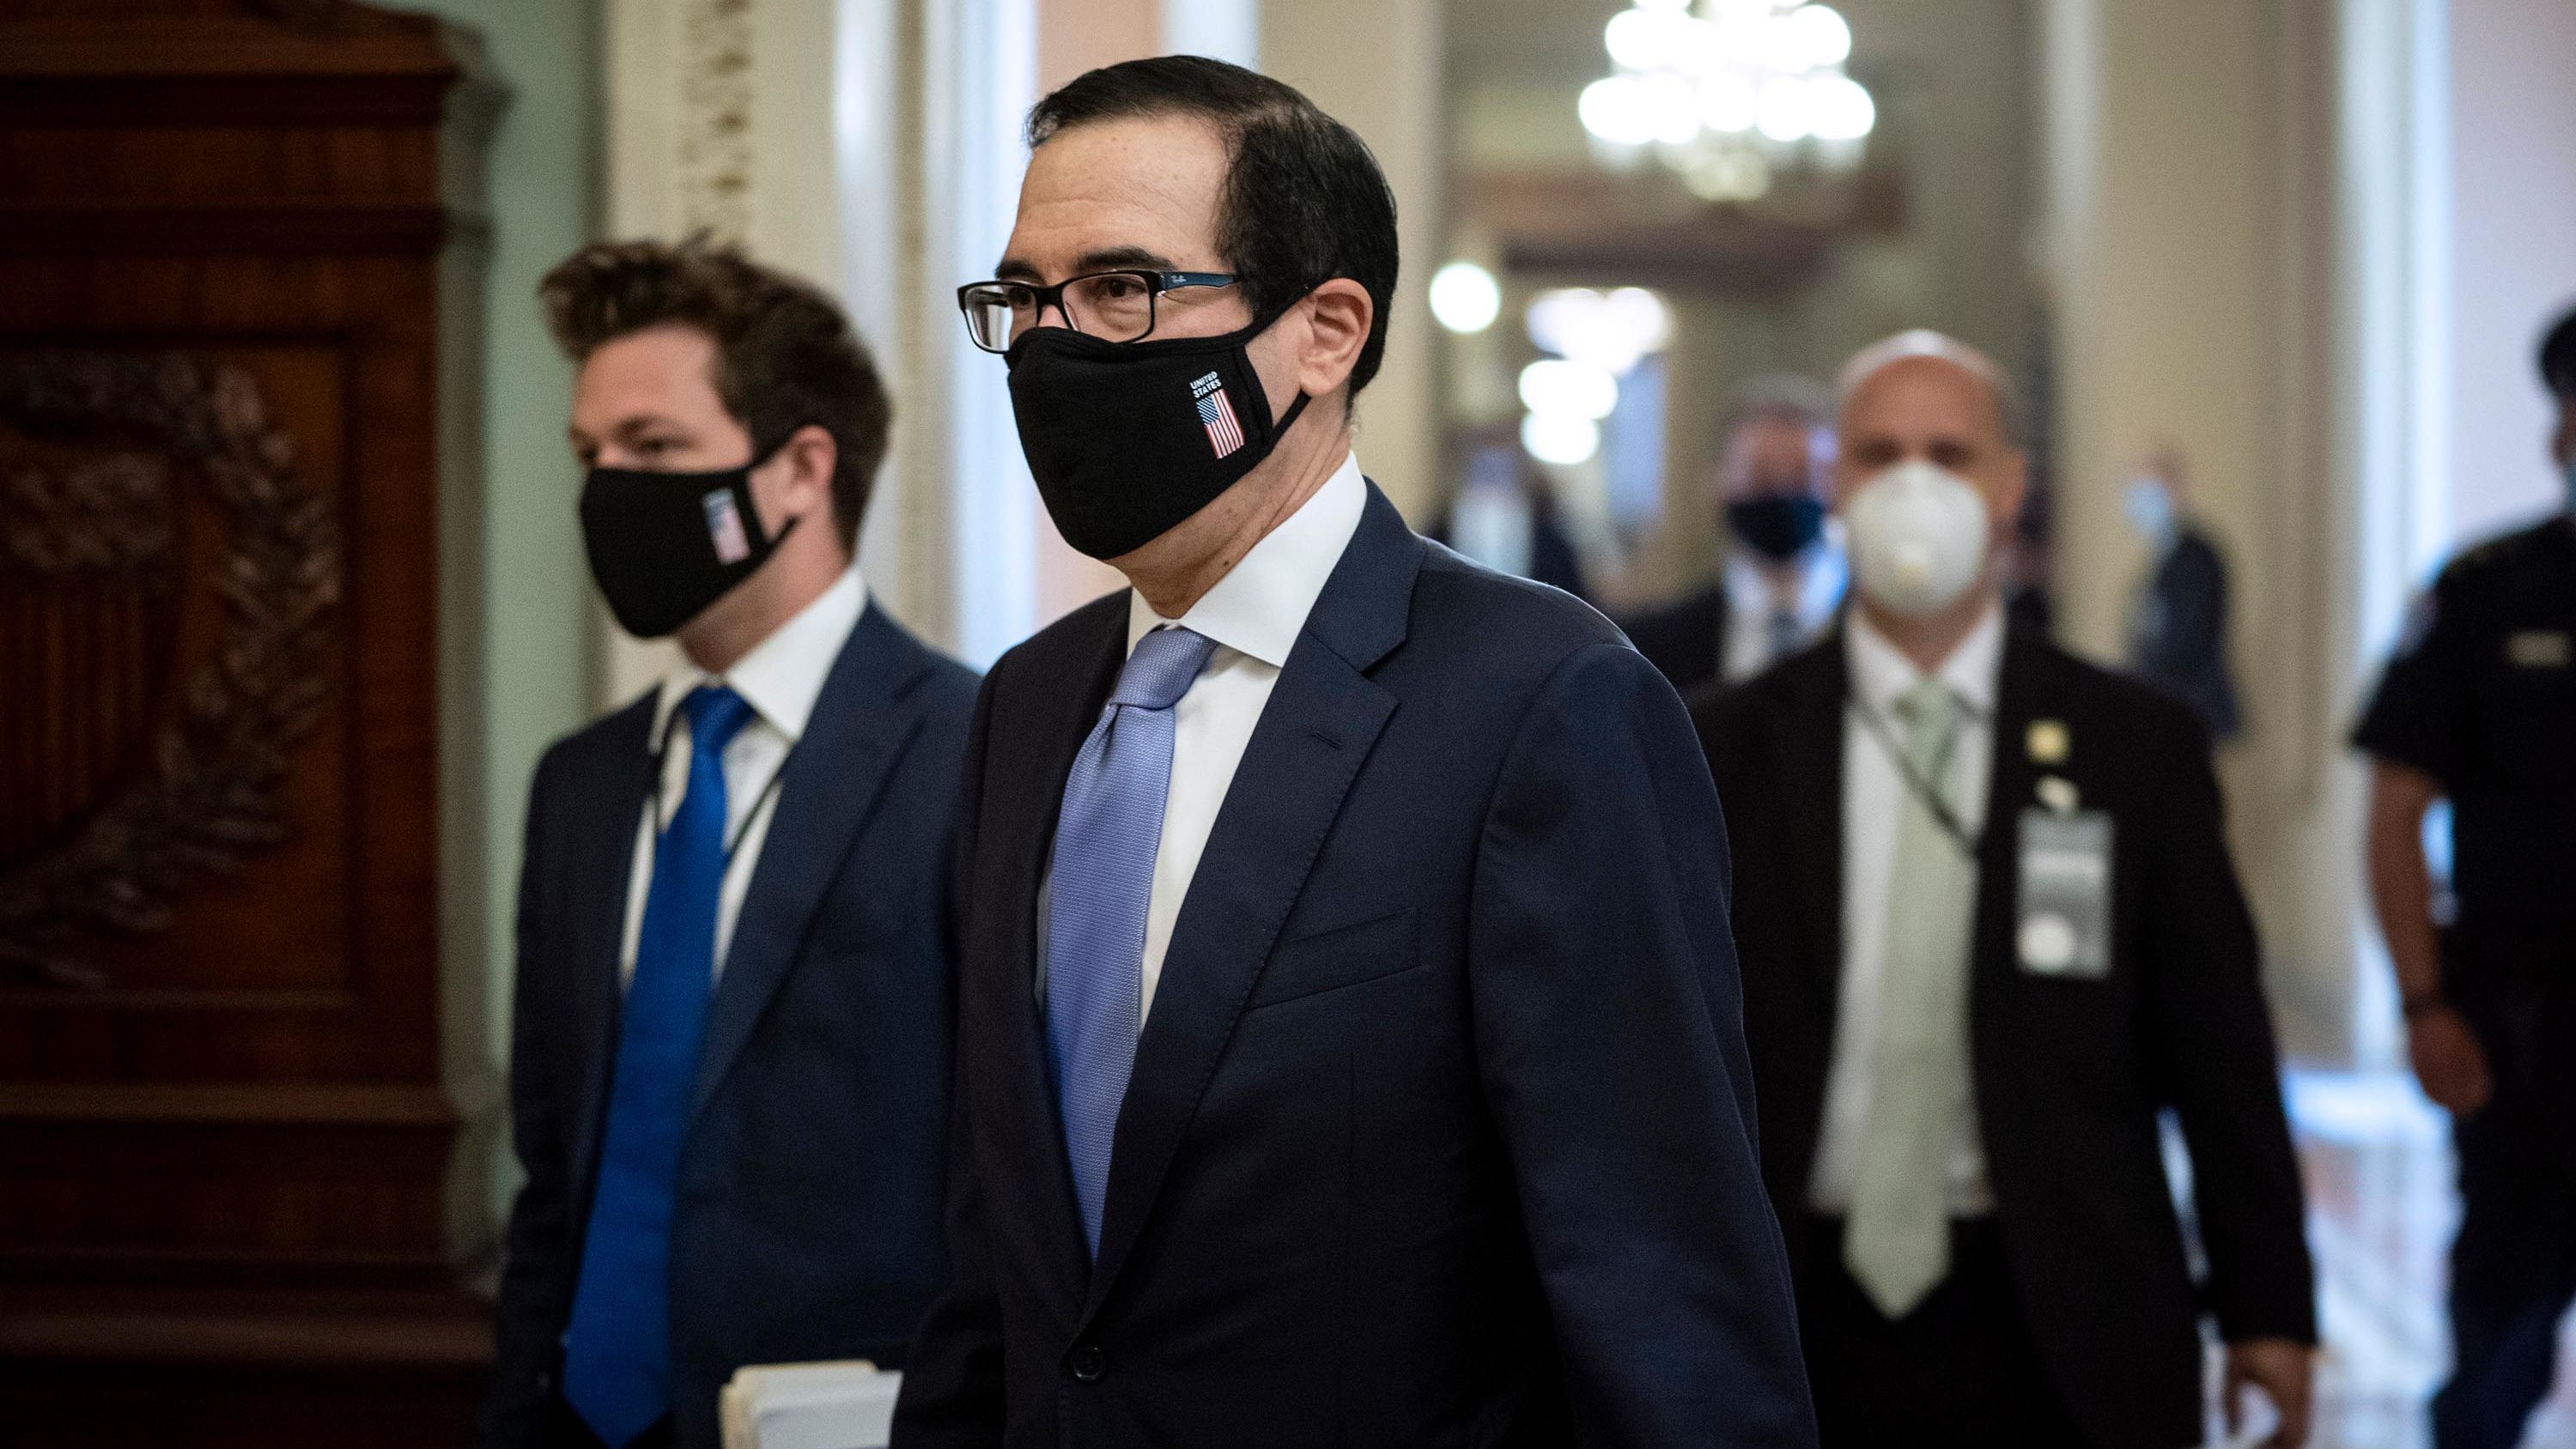 Treasury Secretary Steven Mnuchin exits the office of Senate Majority Leader Mitch McConnell after meeting with McConnell and Vice President Mike Pence at the U.S. Capitol on May 19, 2020 in Washington, DC. President Trump is scheduled to attend a luncheon this afternoon with Senate Republicans. 